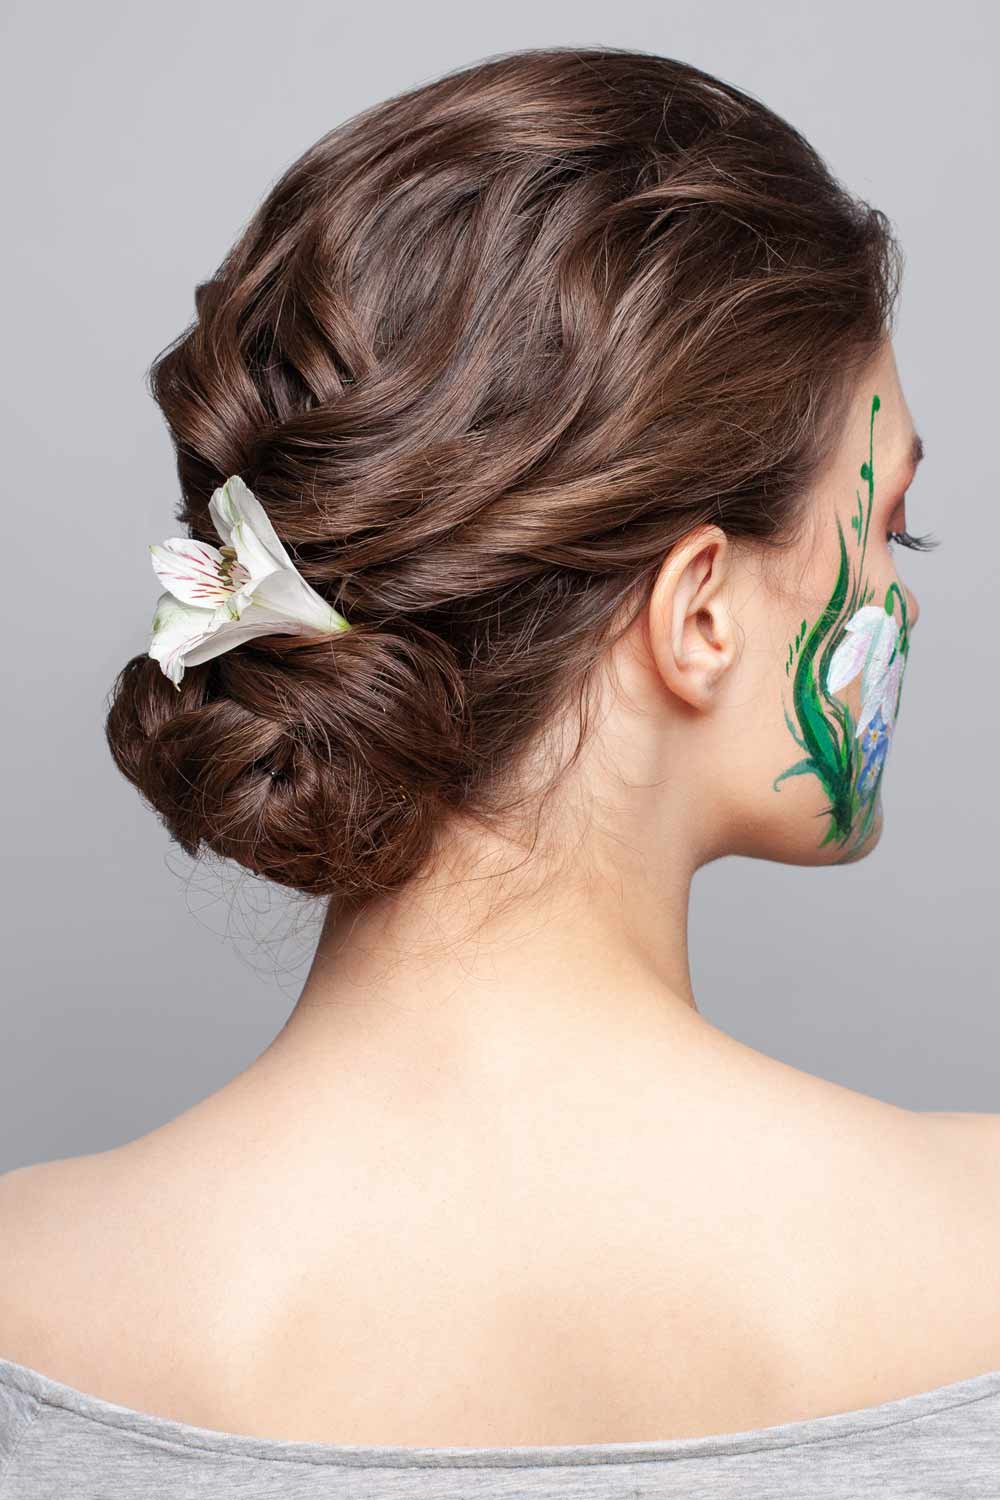 Low Updo Hairstyle with Flower